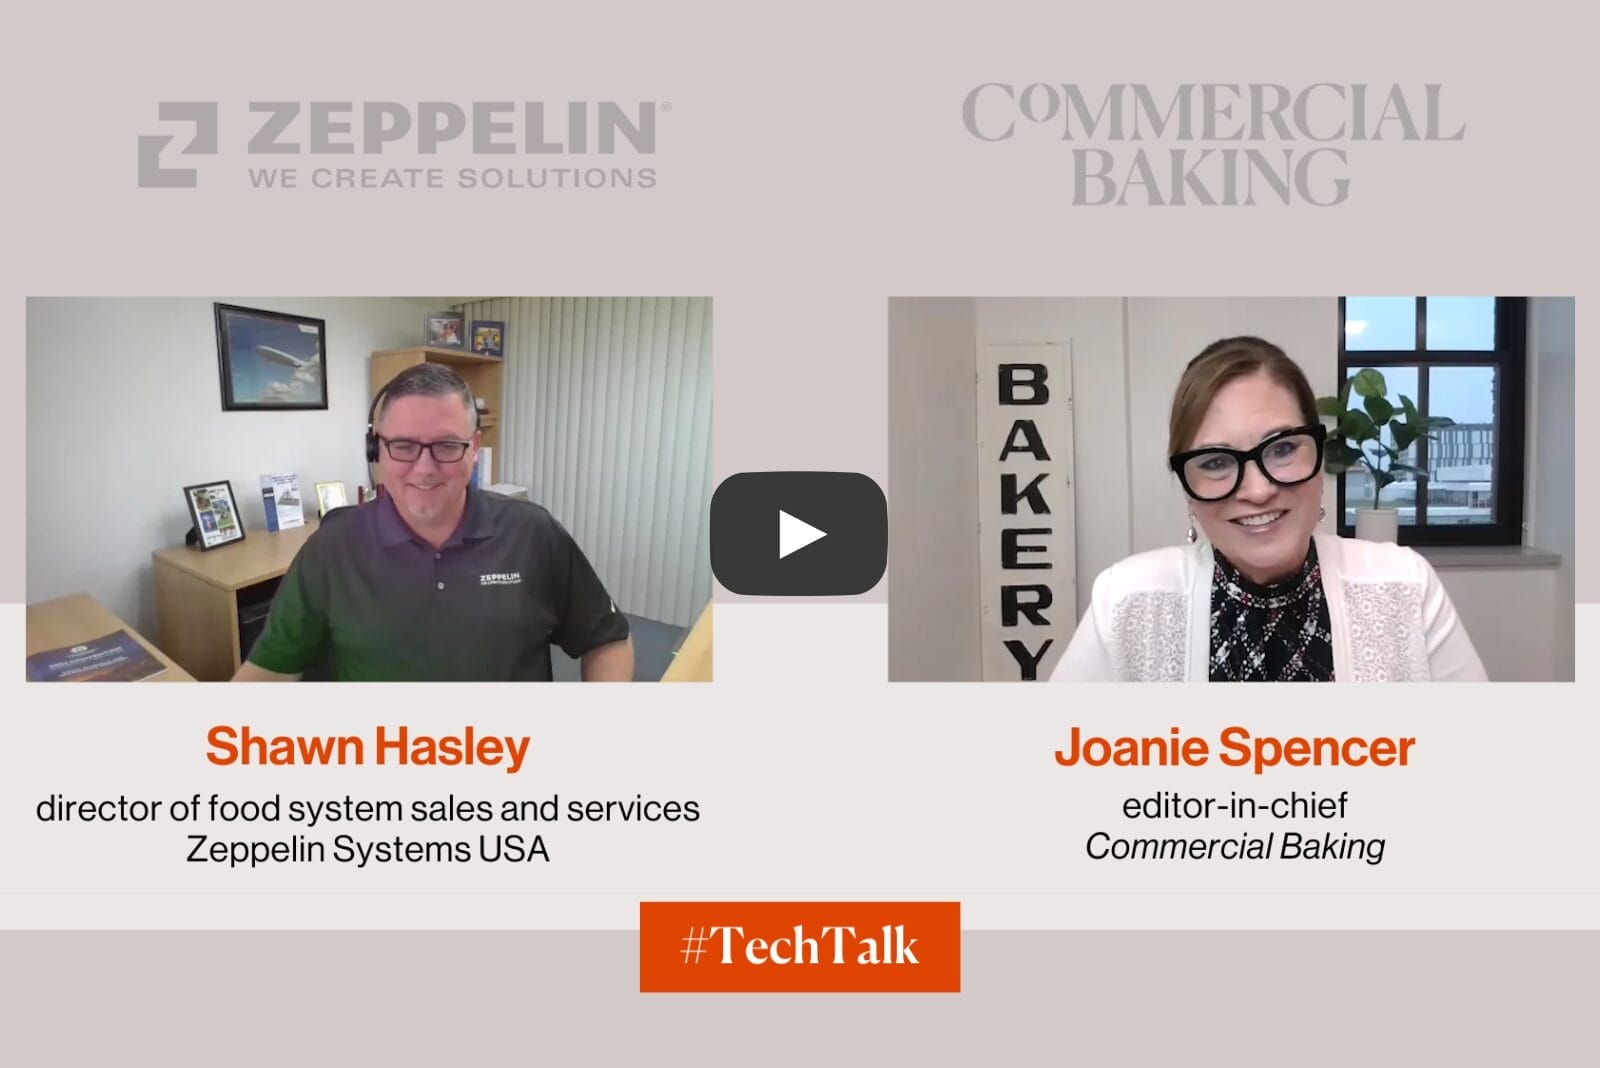 Two people smiling and talking about a featured technology from Zeppelin Systems USA.